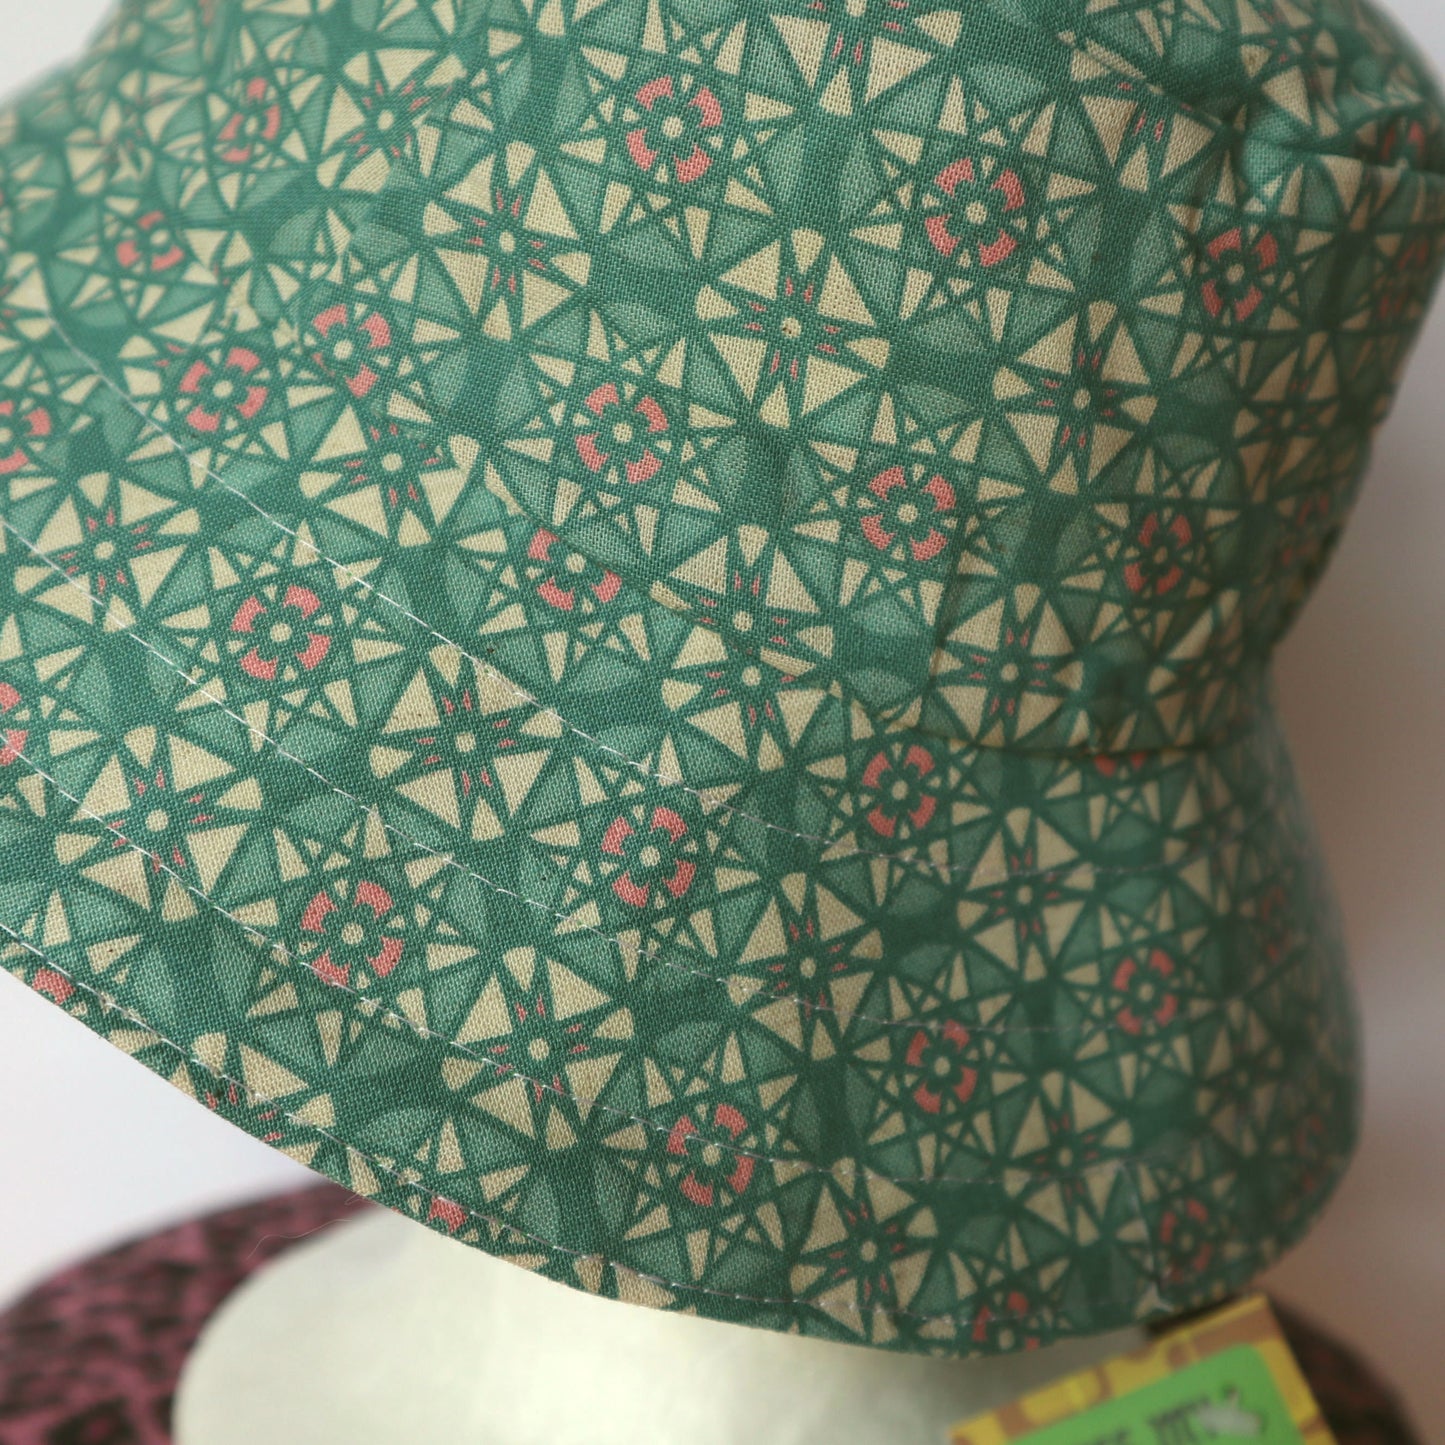 Reversible Bucket Hat - girls sizes 3 mths - 6 yrs - lime green floral